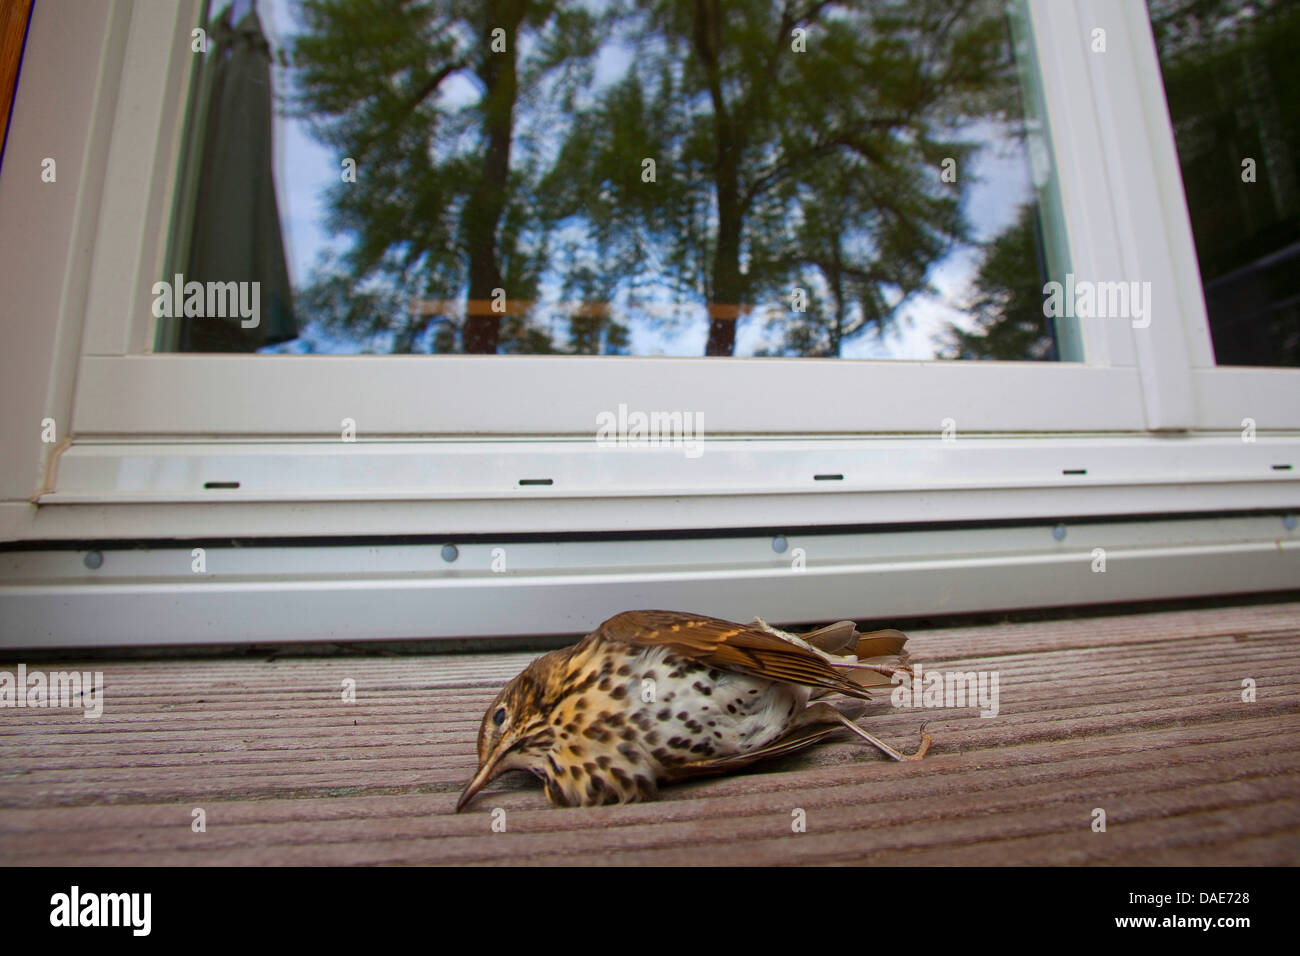 song thrush (Turdus philomelos), lying deadly injured in front of a window, Germany Stock Photo